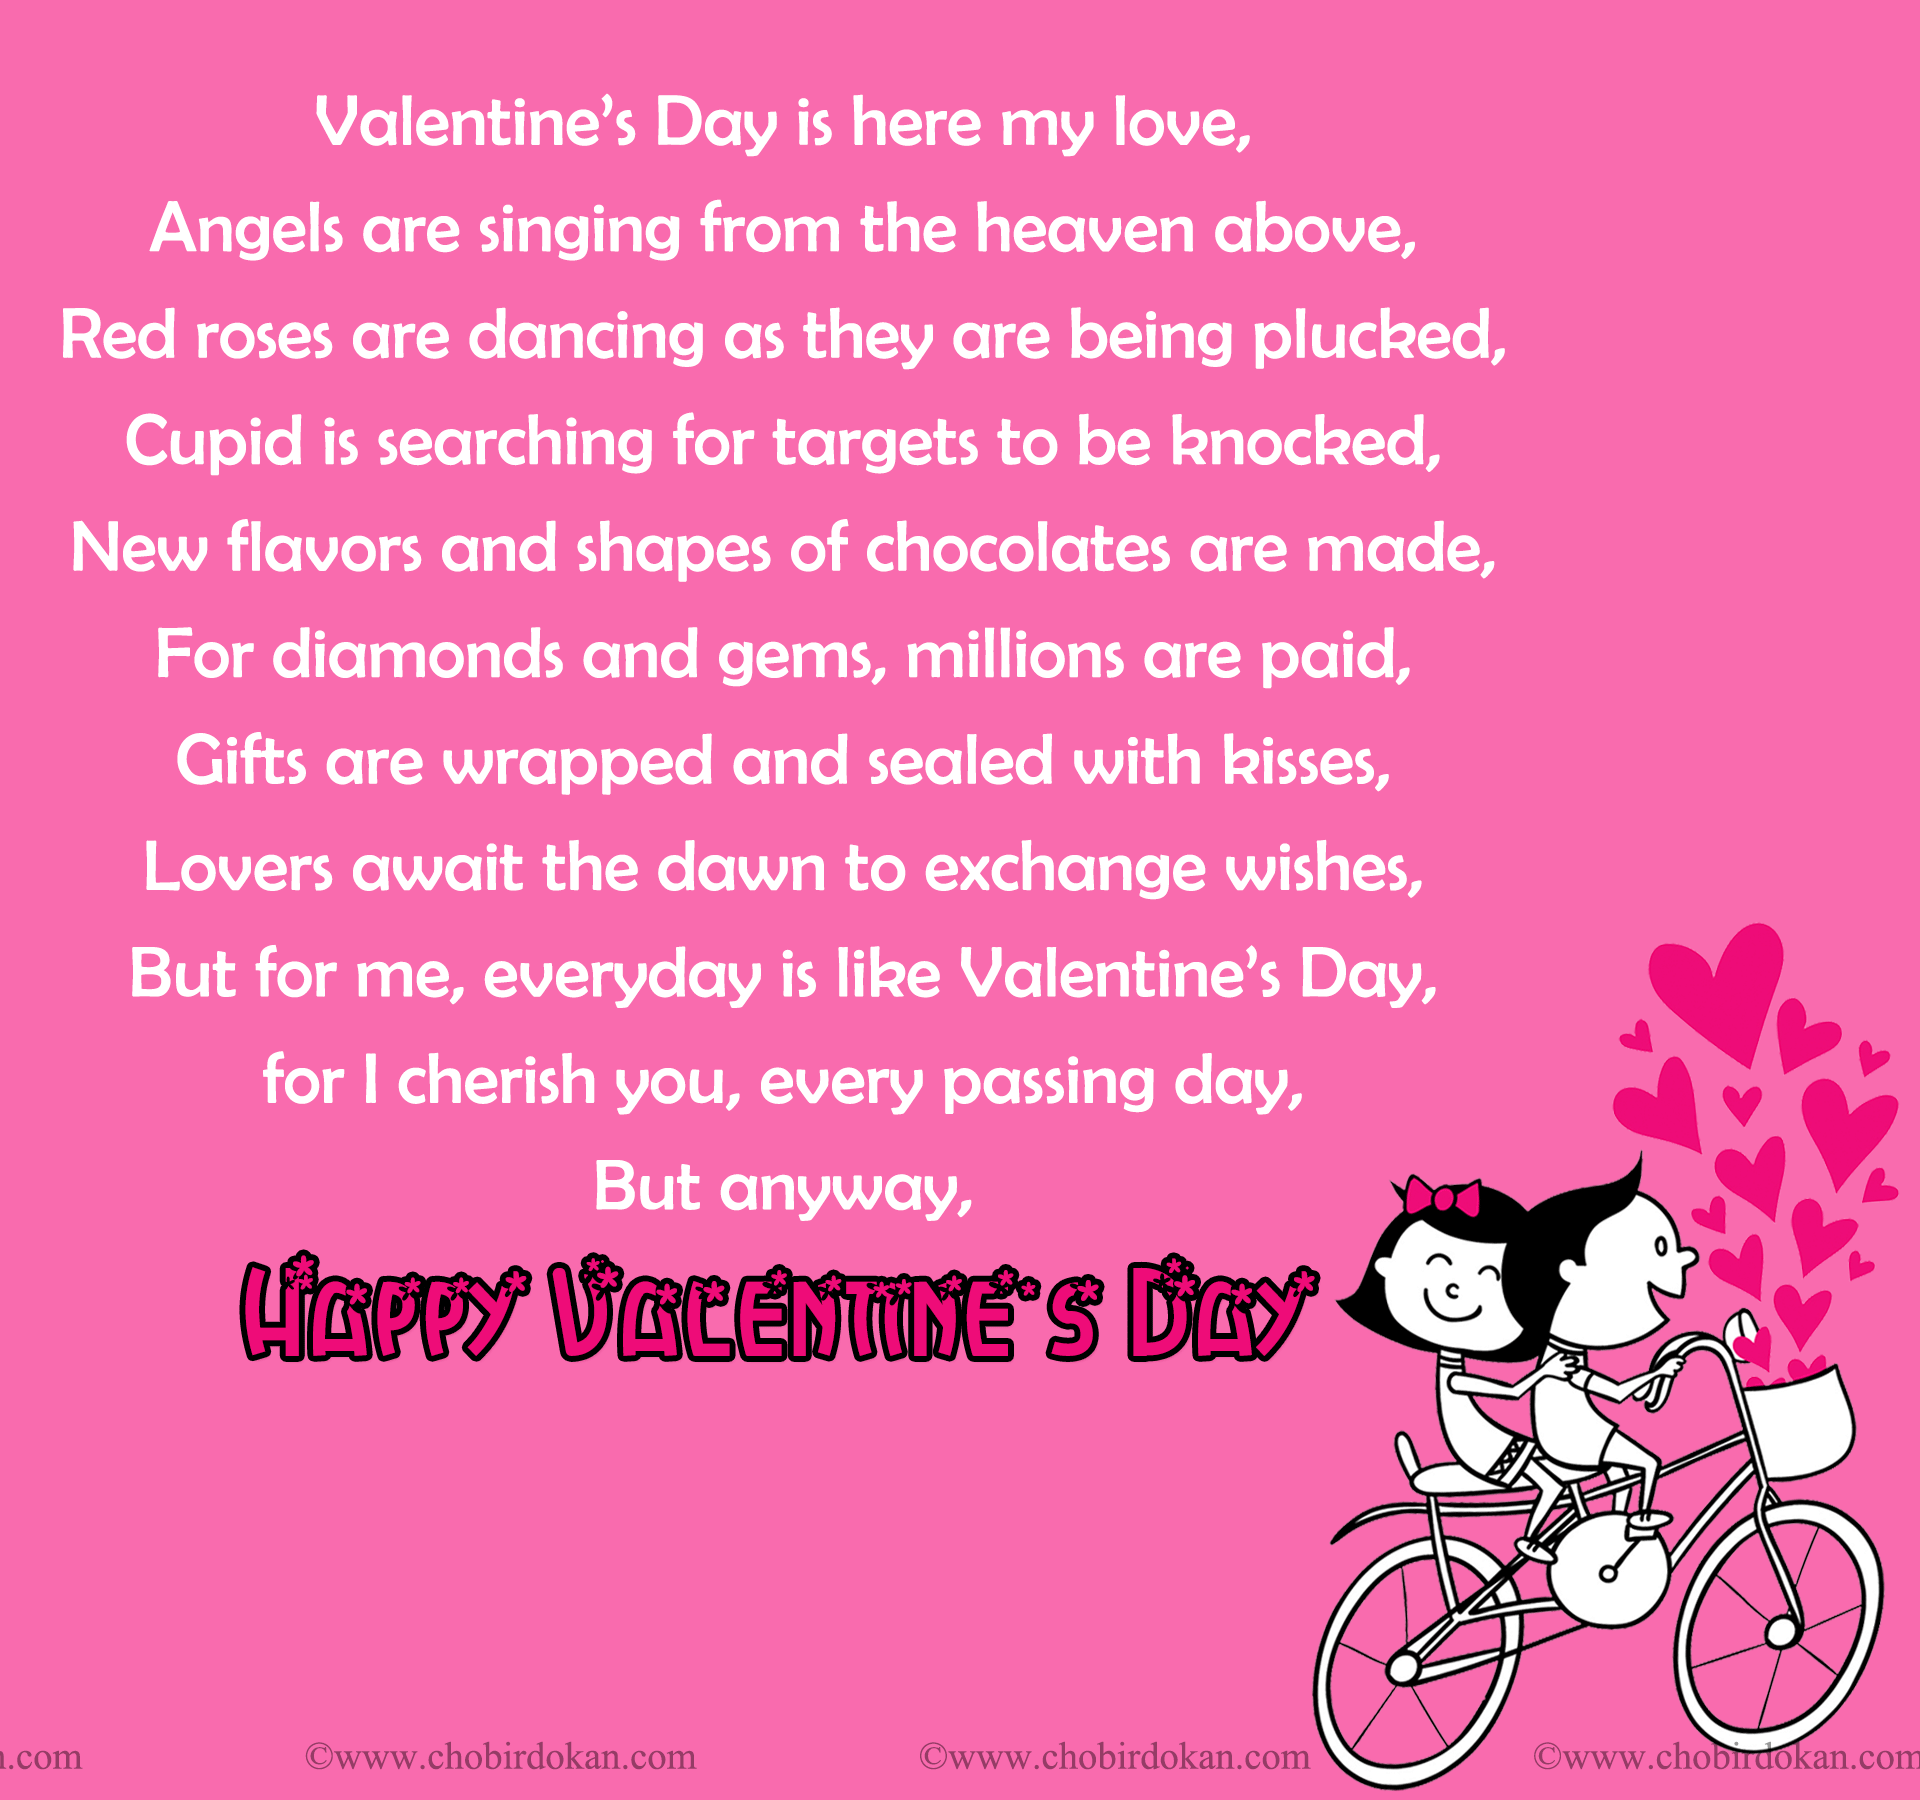 Valentines Poems For Him; For Your Boyfriend or Husband|Poems|Chobirdokan